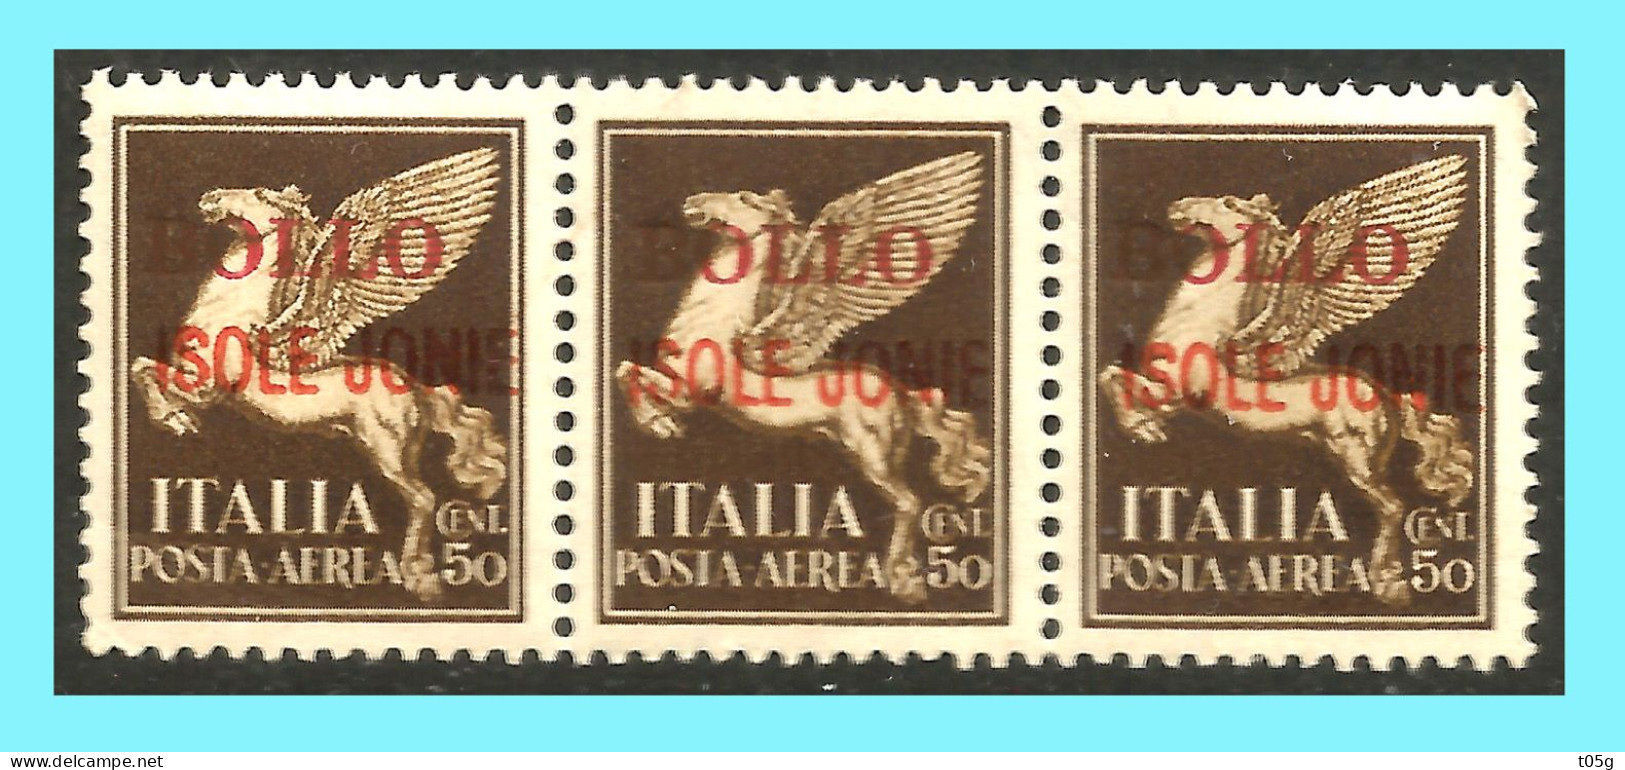 REVENUE: ITALY- GREECE- GRECE- HELLAS 1943 :  3X0.50cend  "Ionian Islands Italian Occupation" from Set MNH** - Iles Ioniques